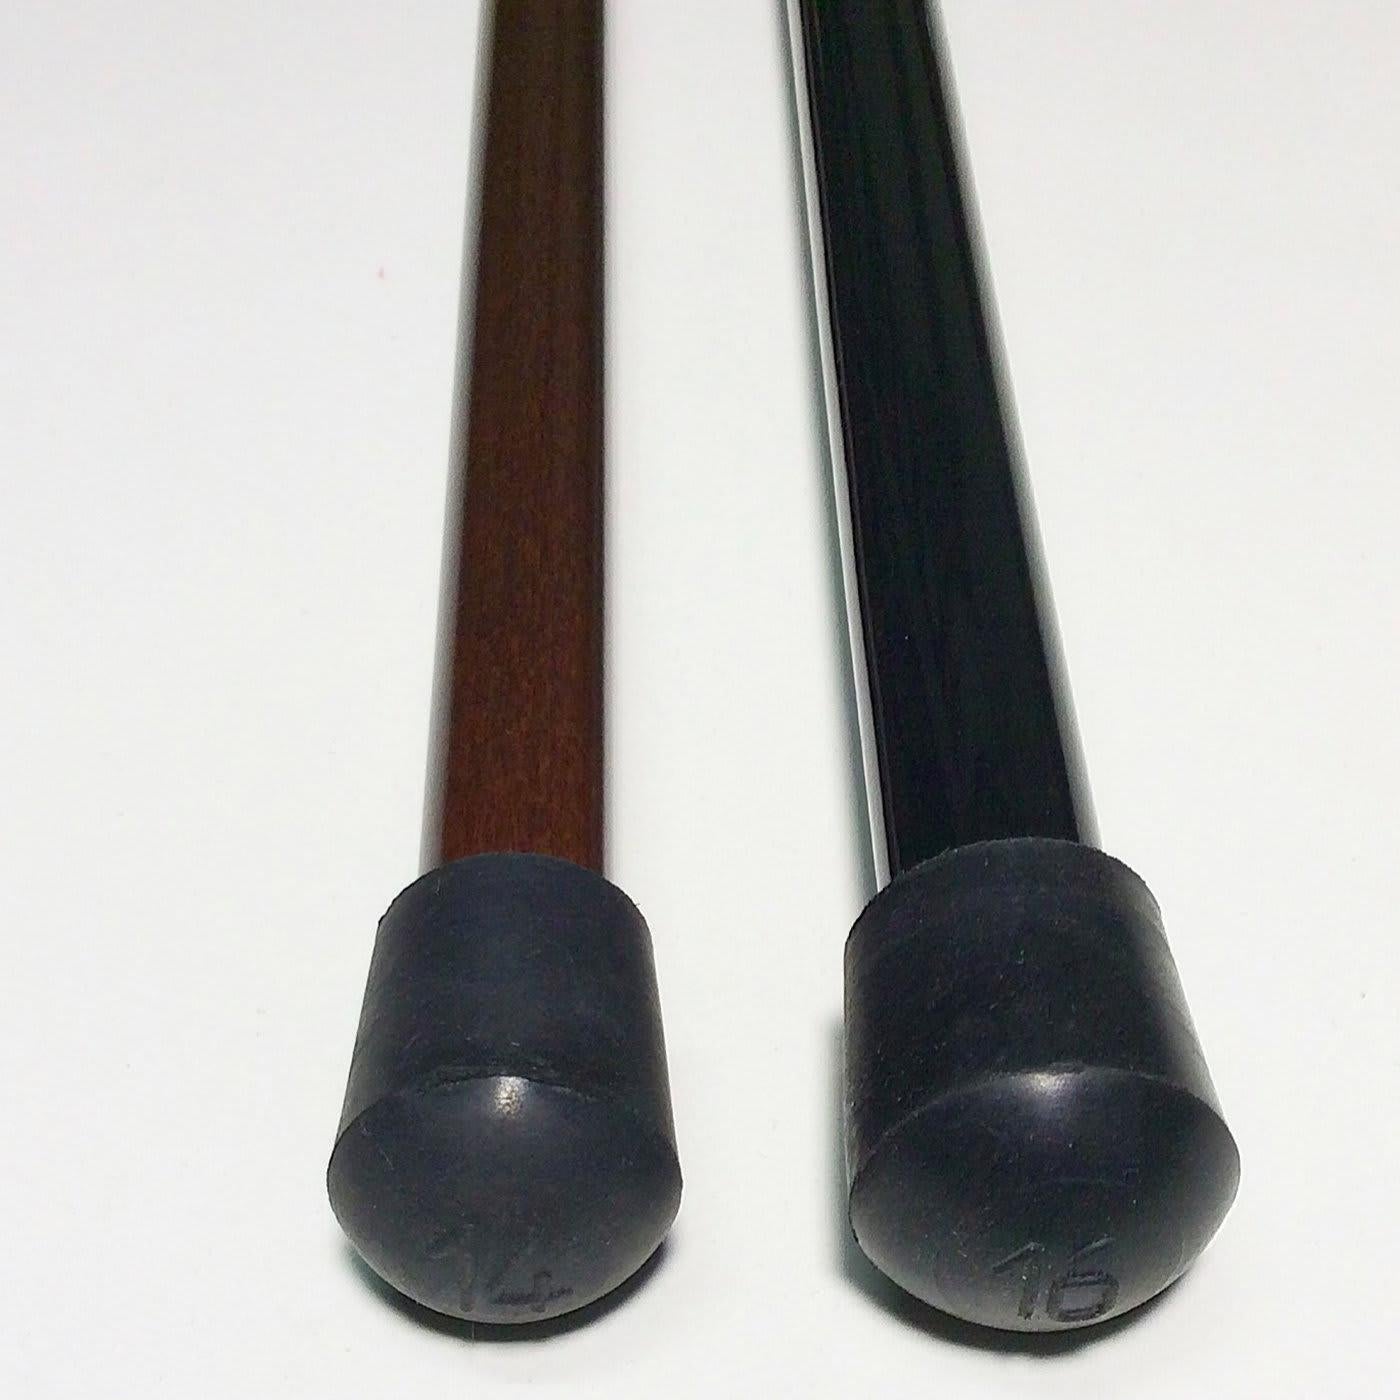 An elegant sterling silver handle in the shape of a pointer's head characterizes this refined, collectible cane that is not suitable for support. The conical black-lacquered shaft in beechwood (also available in brown) is enriched with a glossy